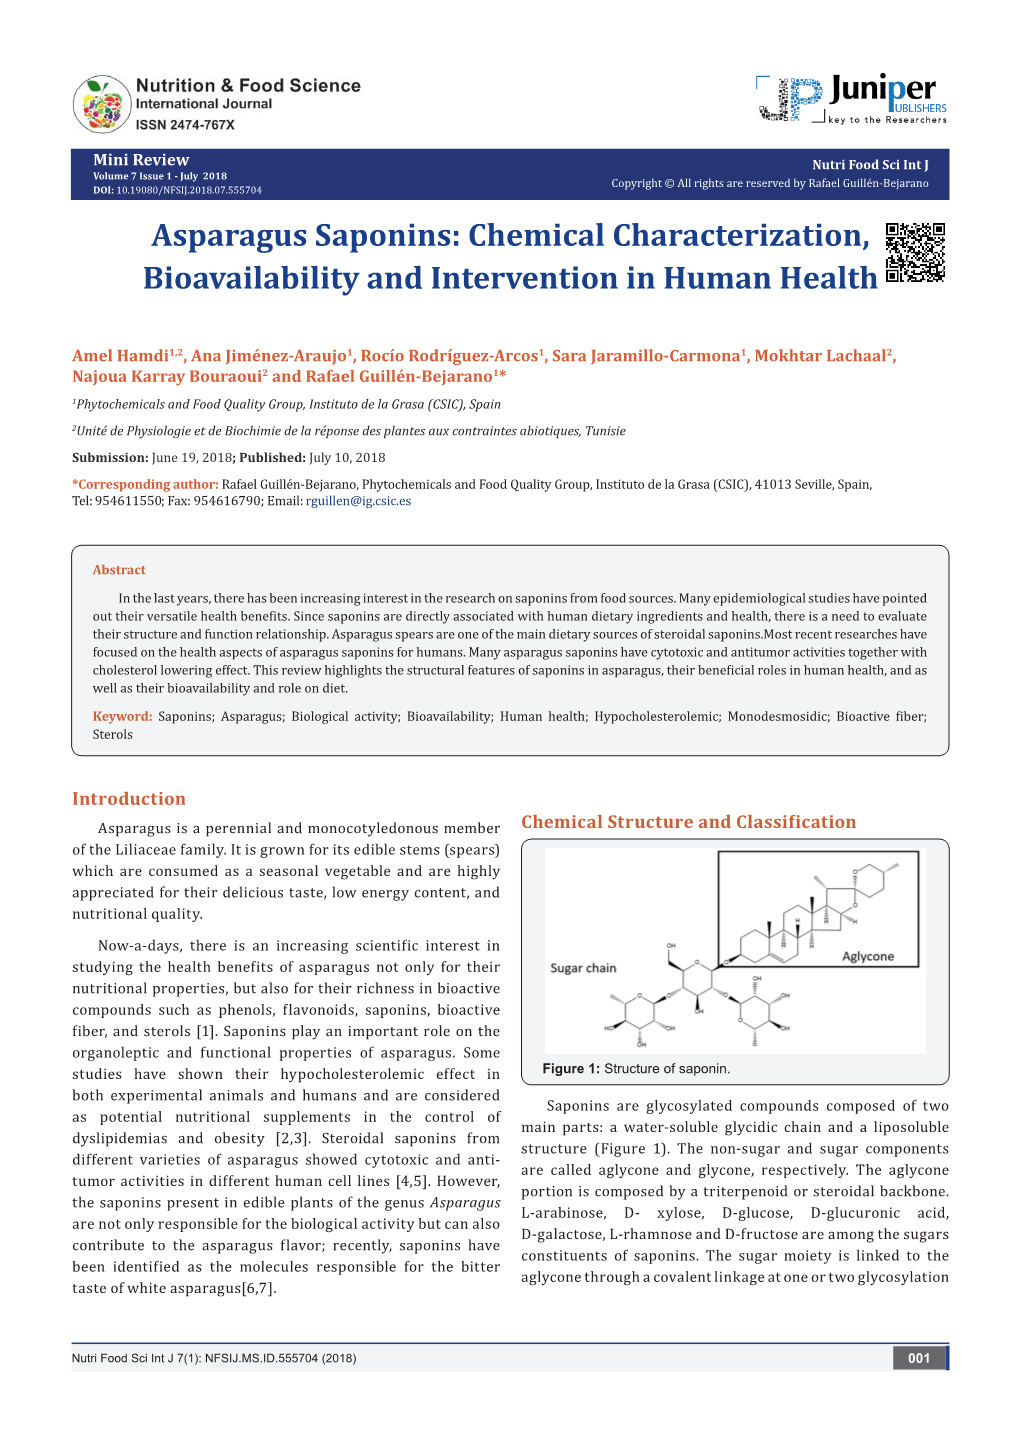 Asparagus Saponins: Chemical Characterization, Bioavailability and Intervention in Human Health